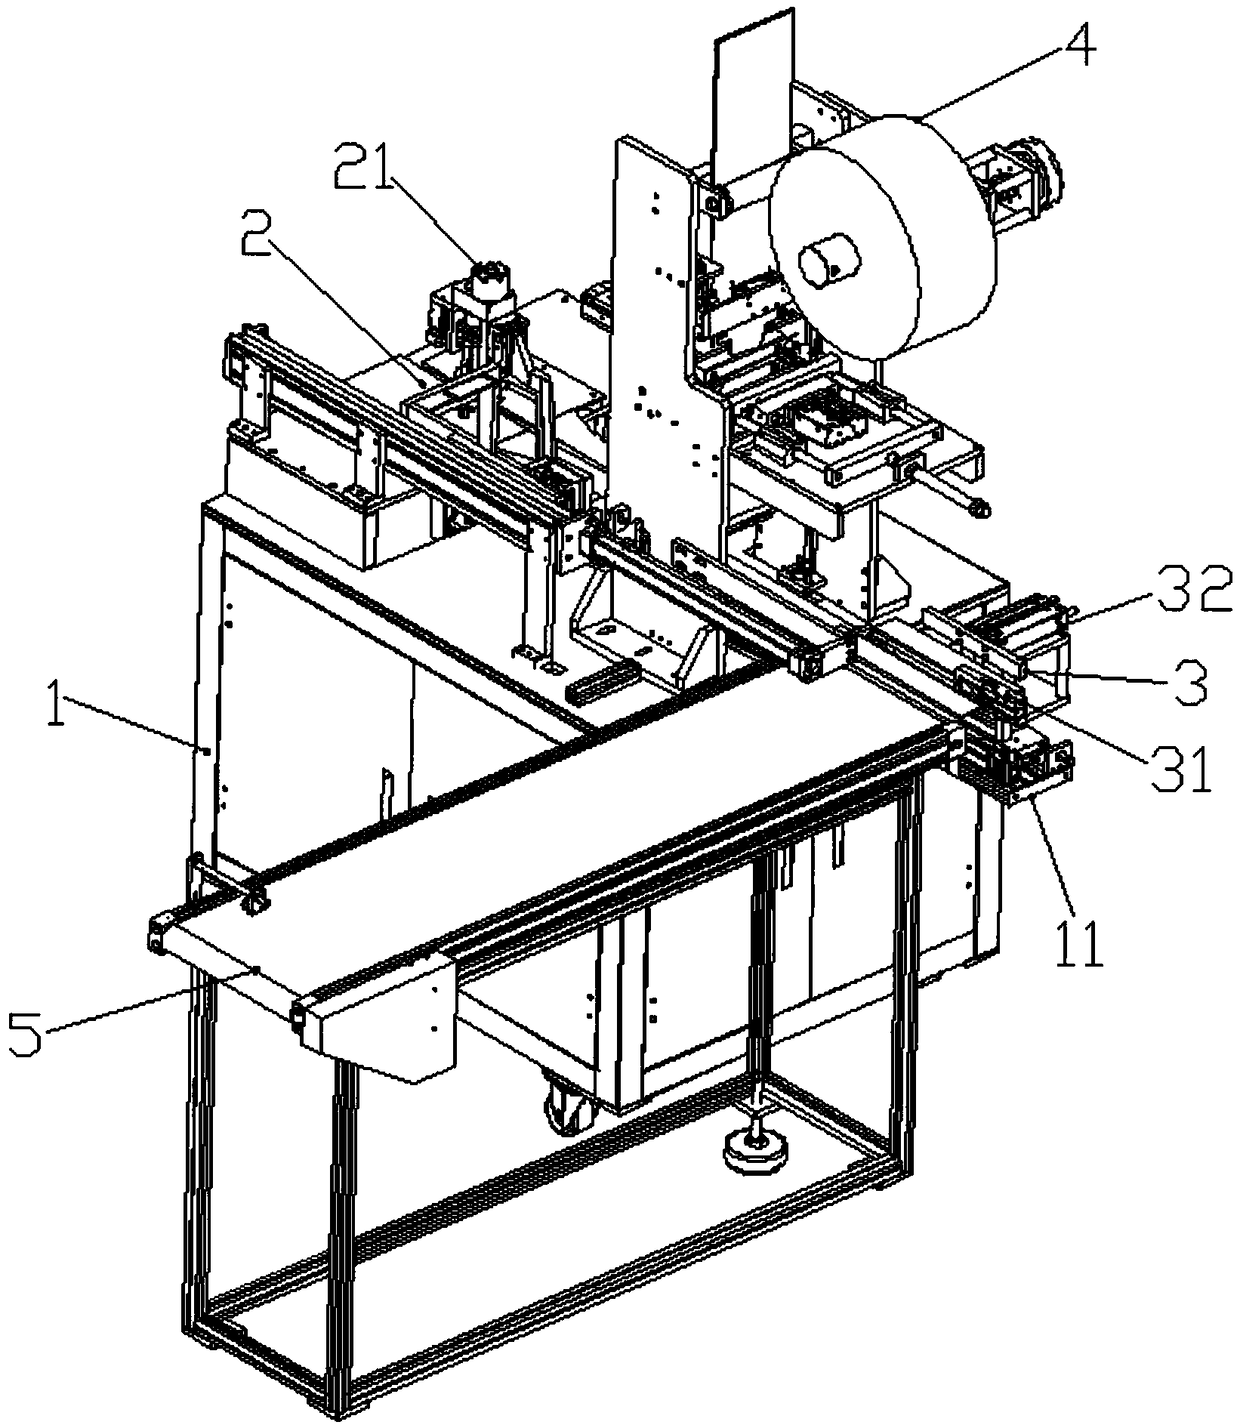 Automatic winding and bagging mechanism for medical catheter and winding and bagging method of automatic winding and bagging mechanism